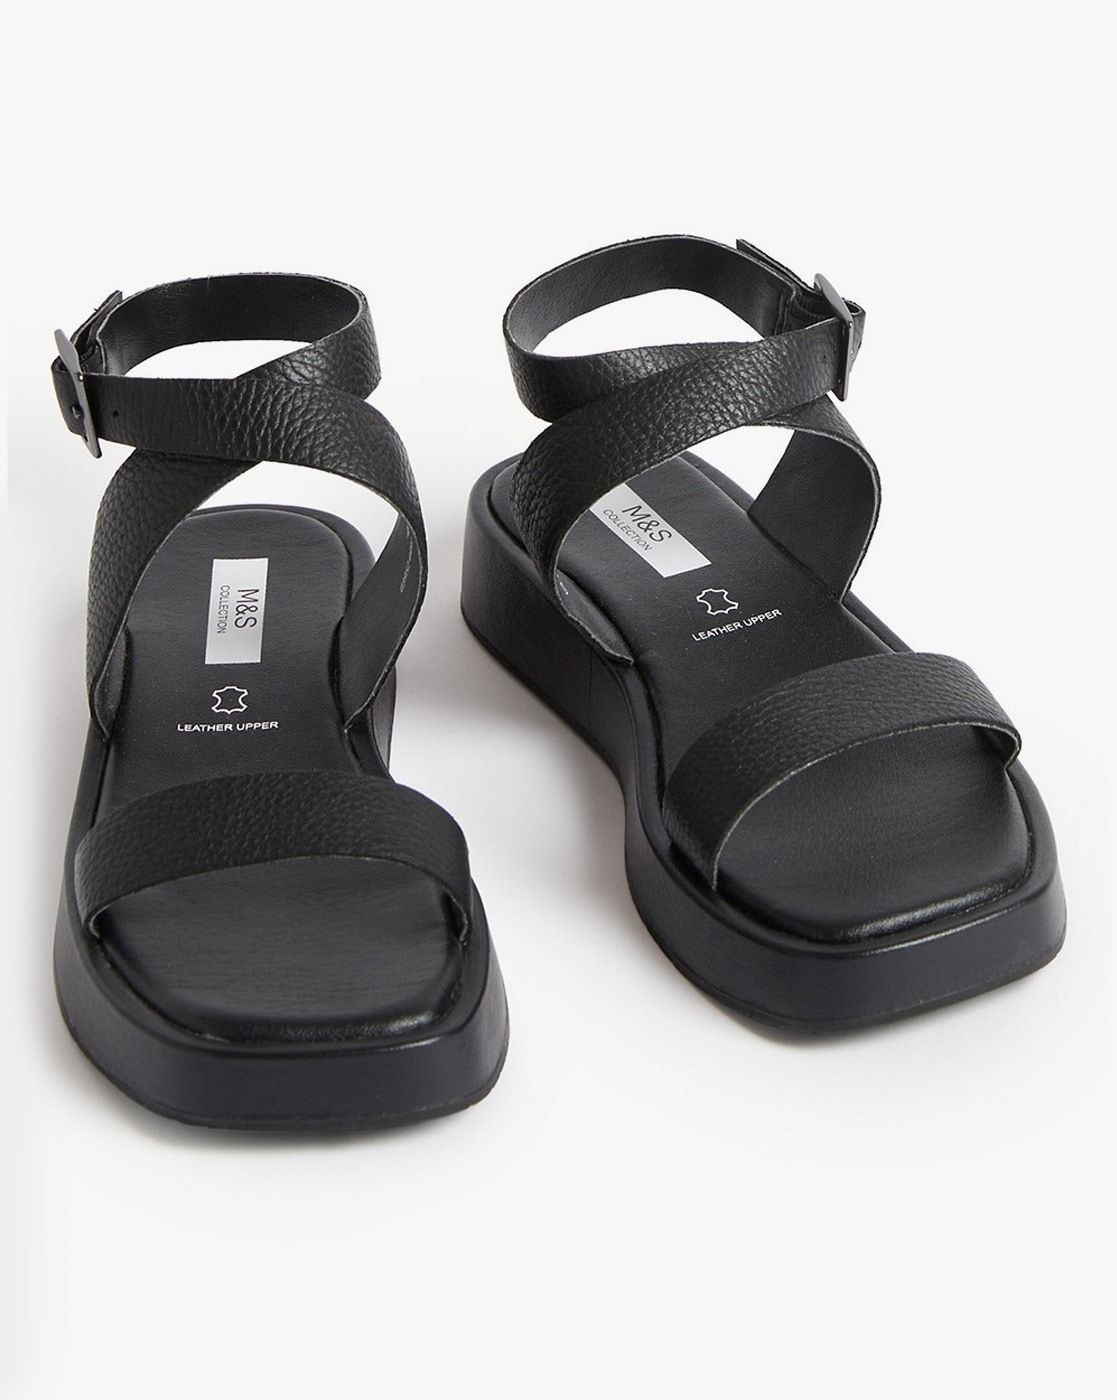 Marks & Spencer's £45 barely-there sandals are so chic